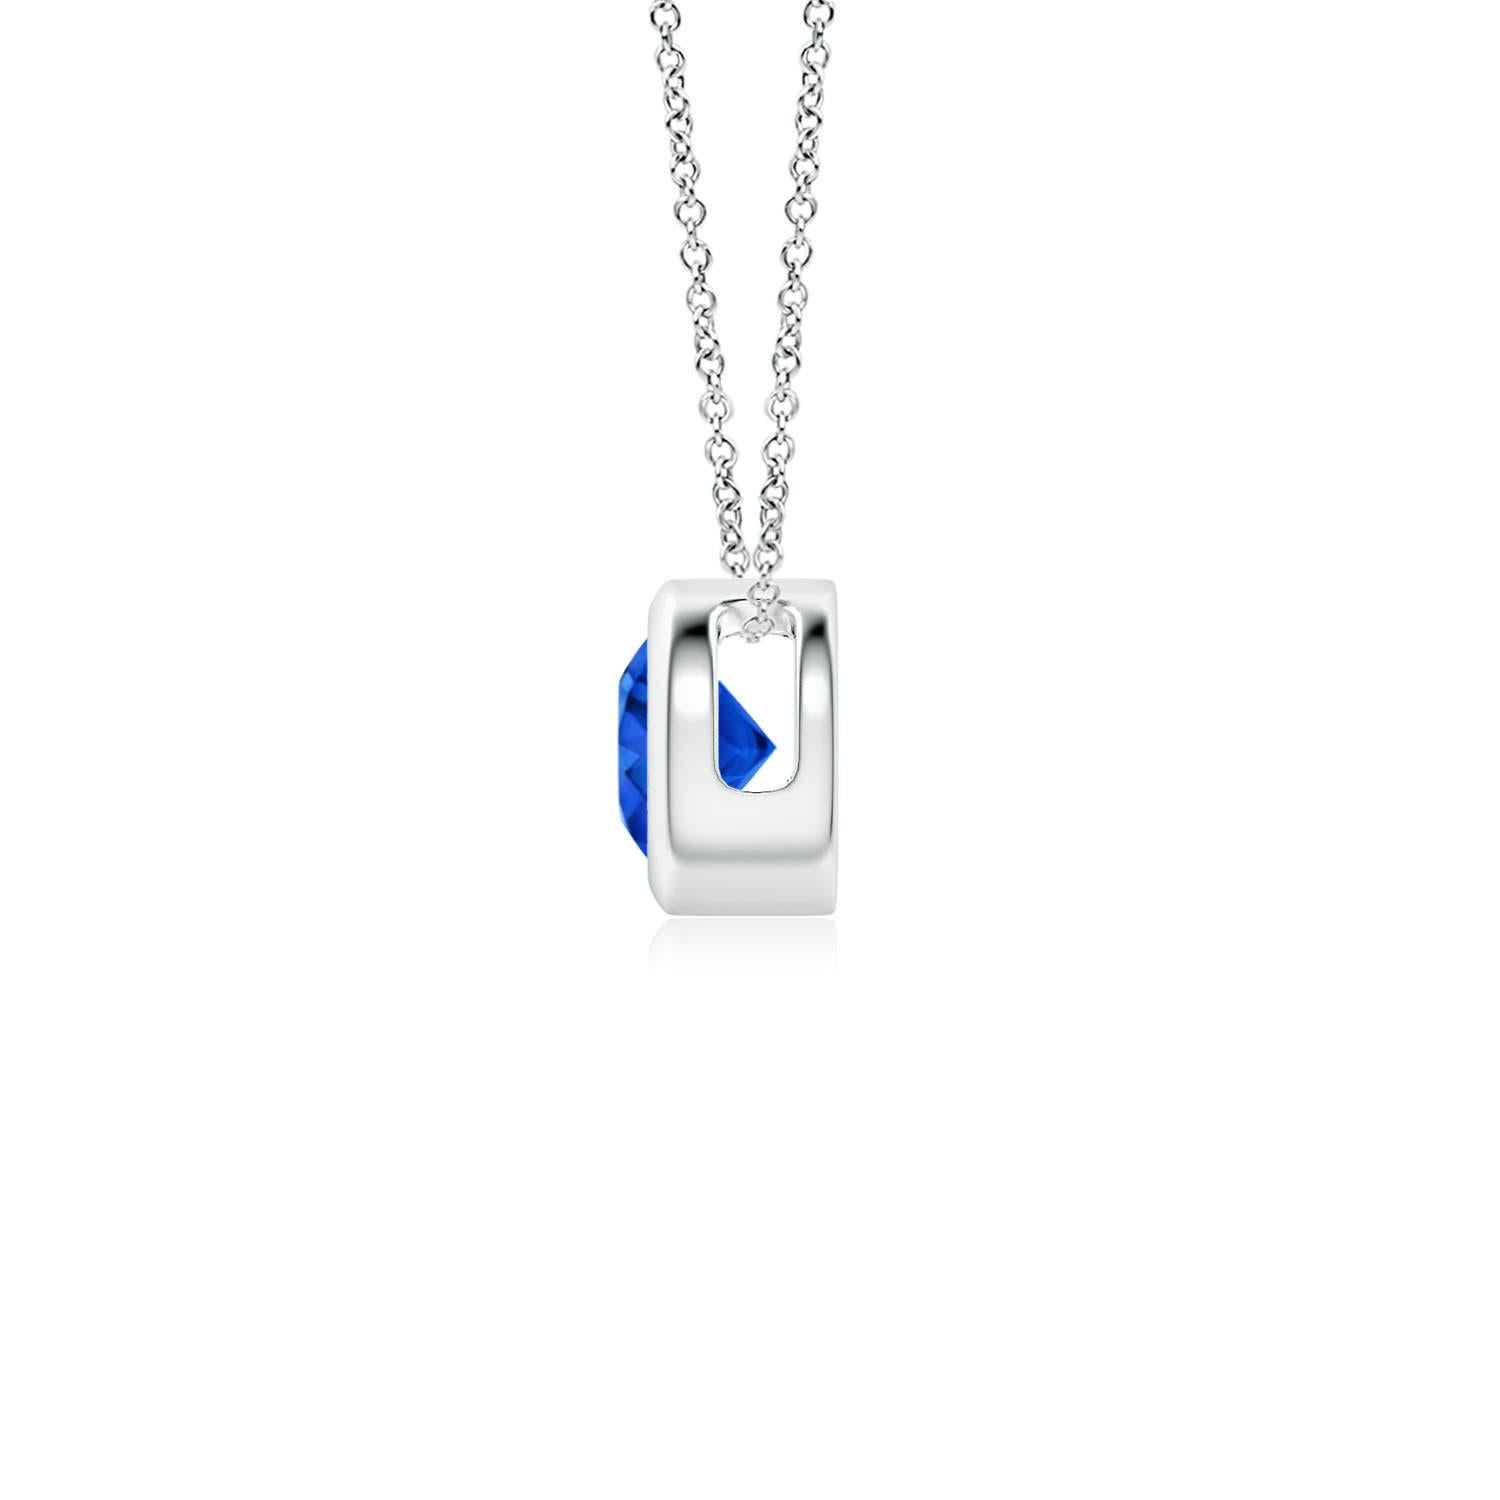 This classic solitaire sapphire pendant's beautiful design makes the center stone appear like it's floating on the chain. The radiant blue gem is secured in a bezel setting. Crafted in 14k white gold, this round sapphire pendant is simple yet